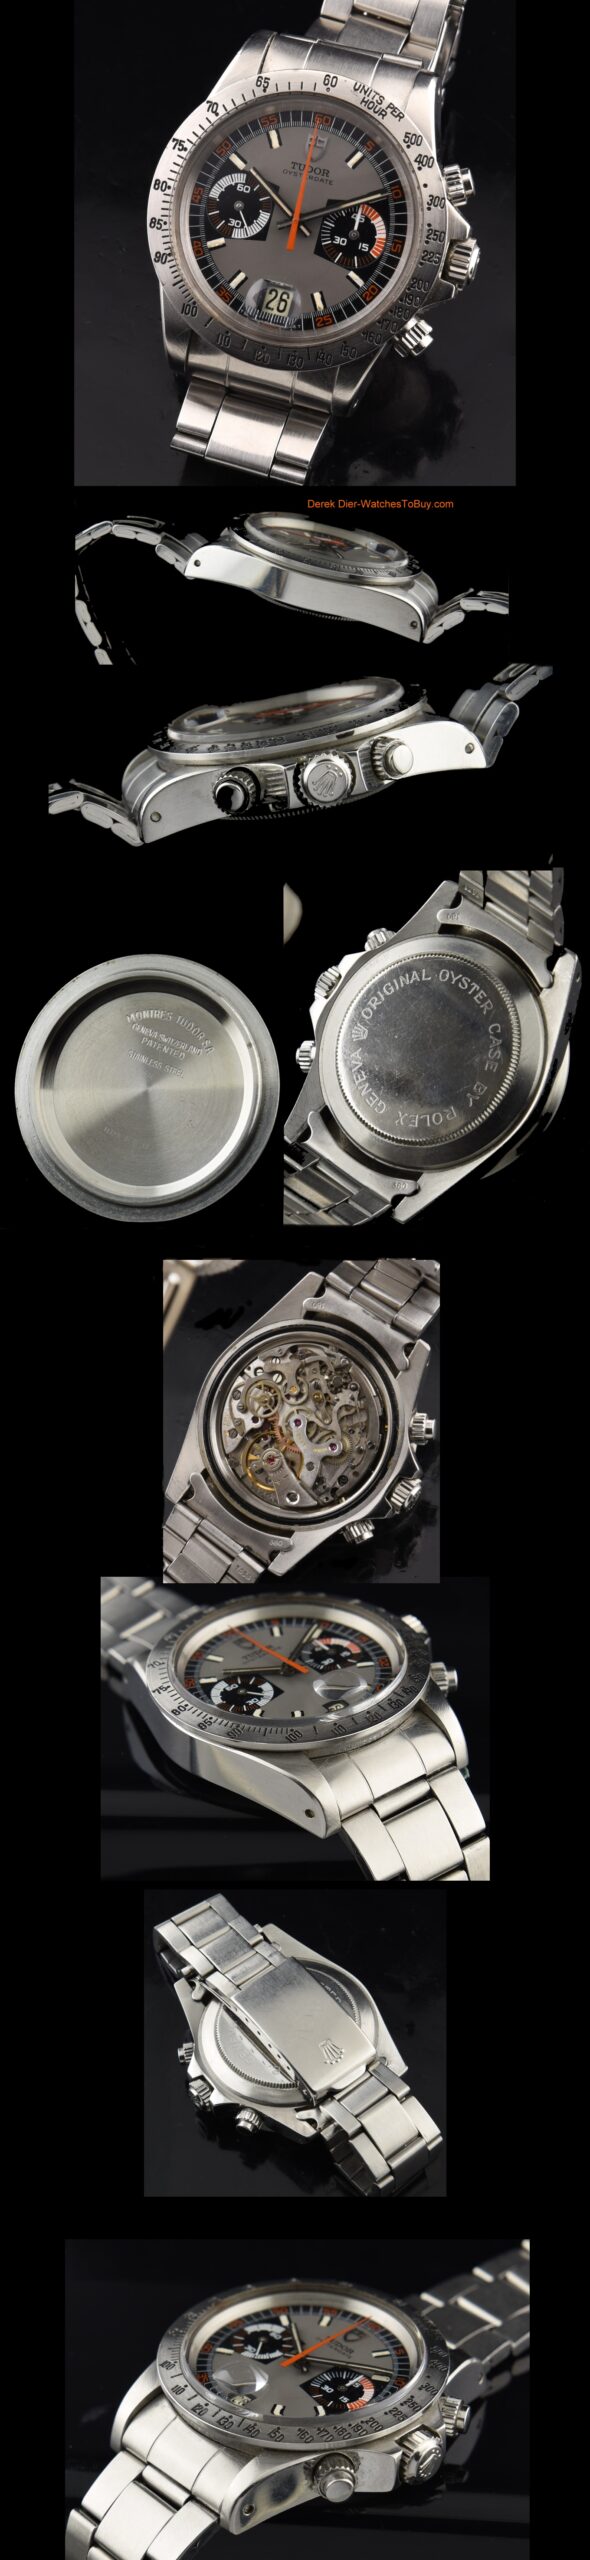 Tudor Monte Carlo stainless steel chronograph watch with original case, bezel, pushers, cyclops crystal, and Valjoux 234 manual movement.